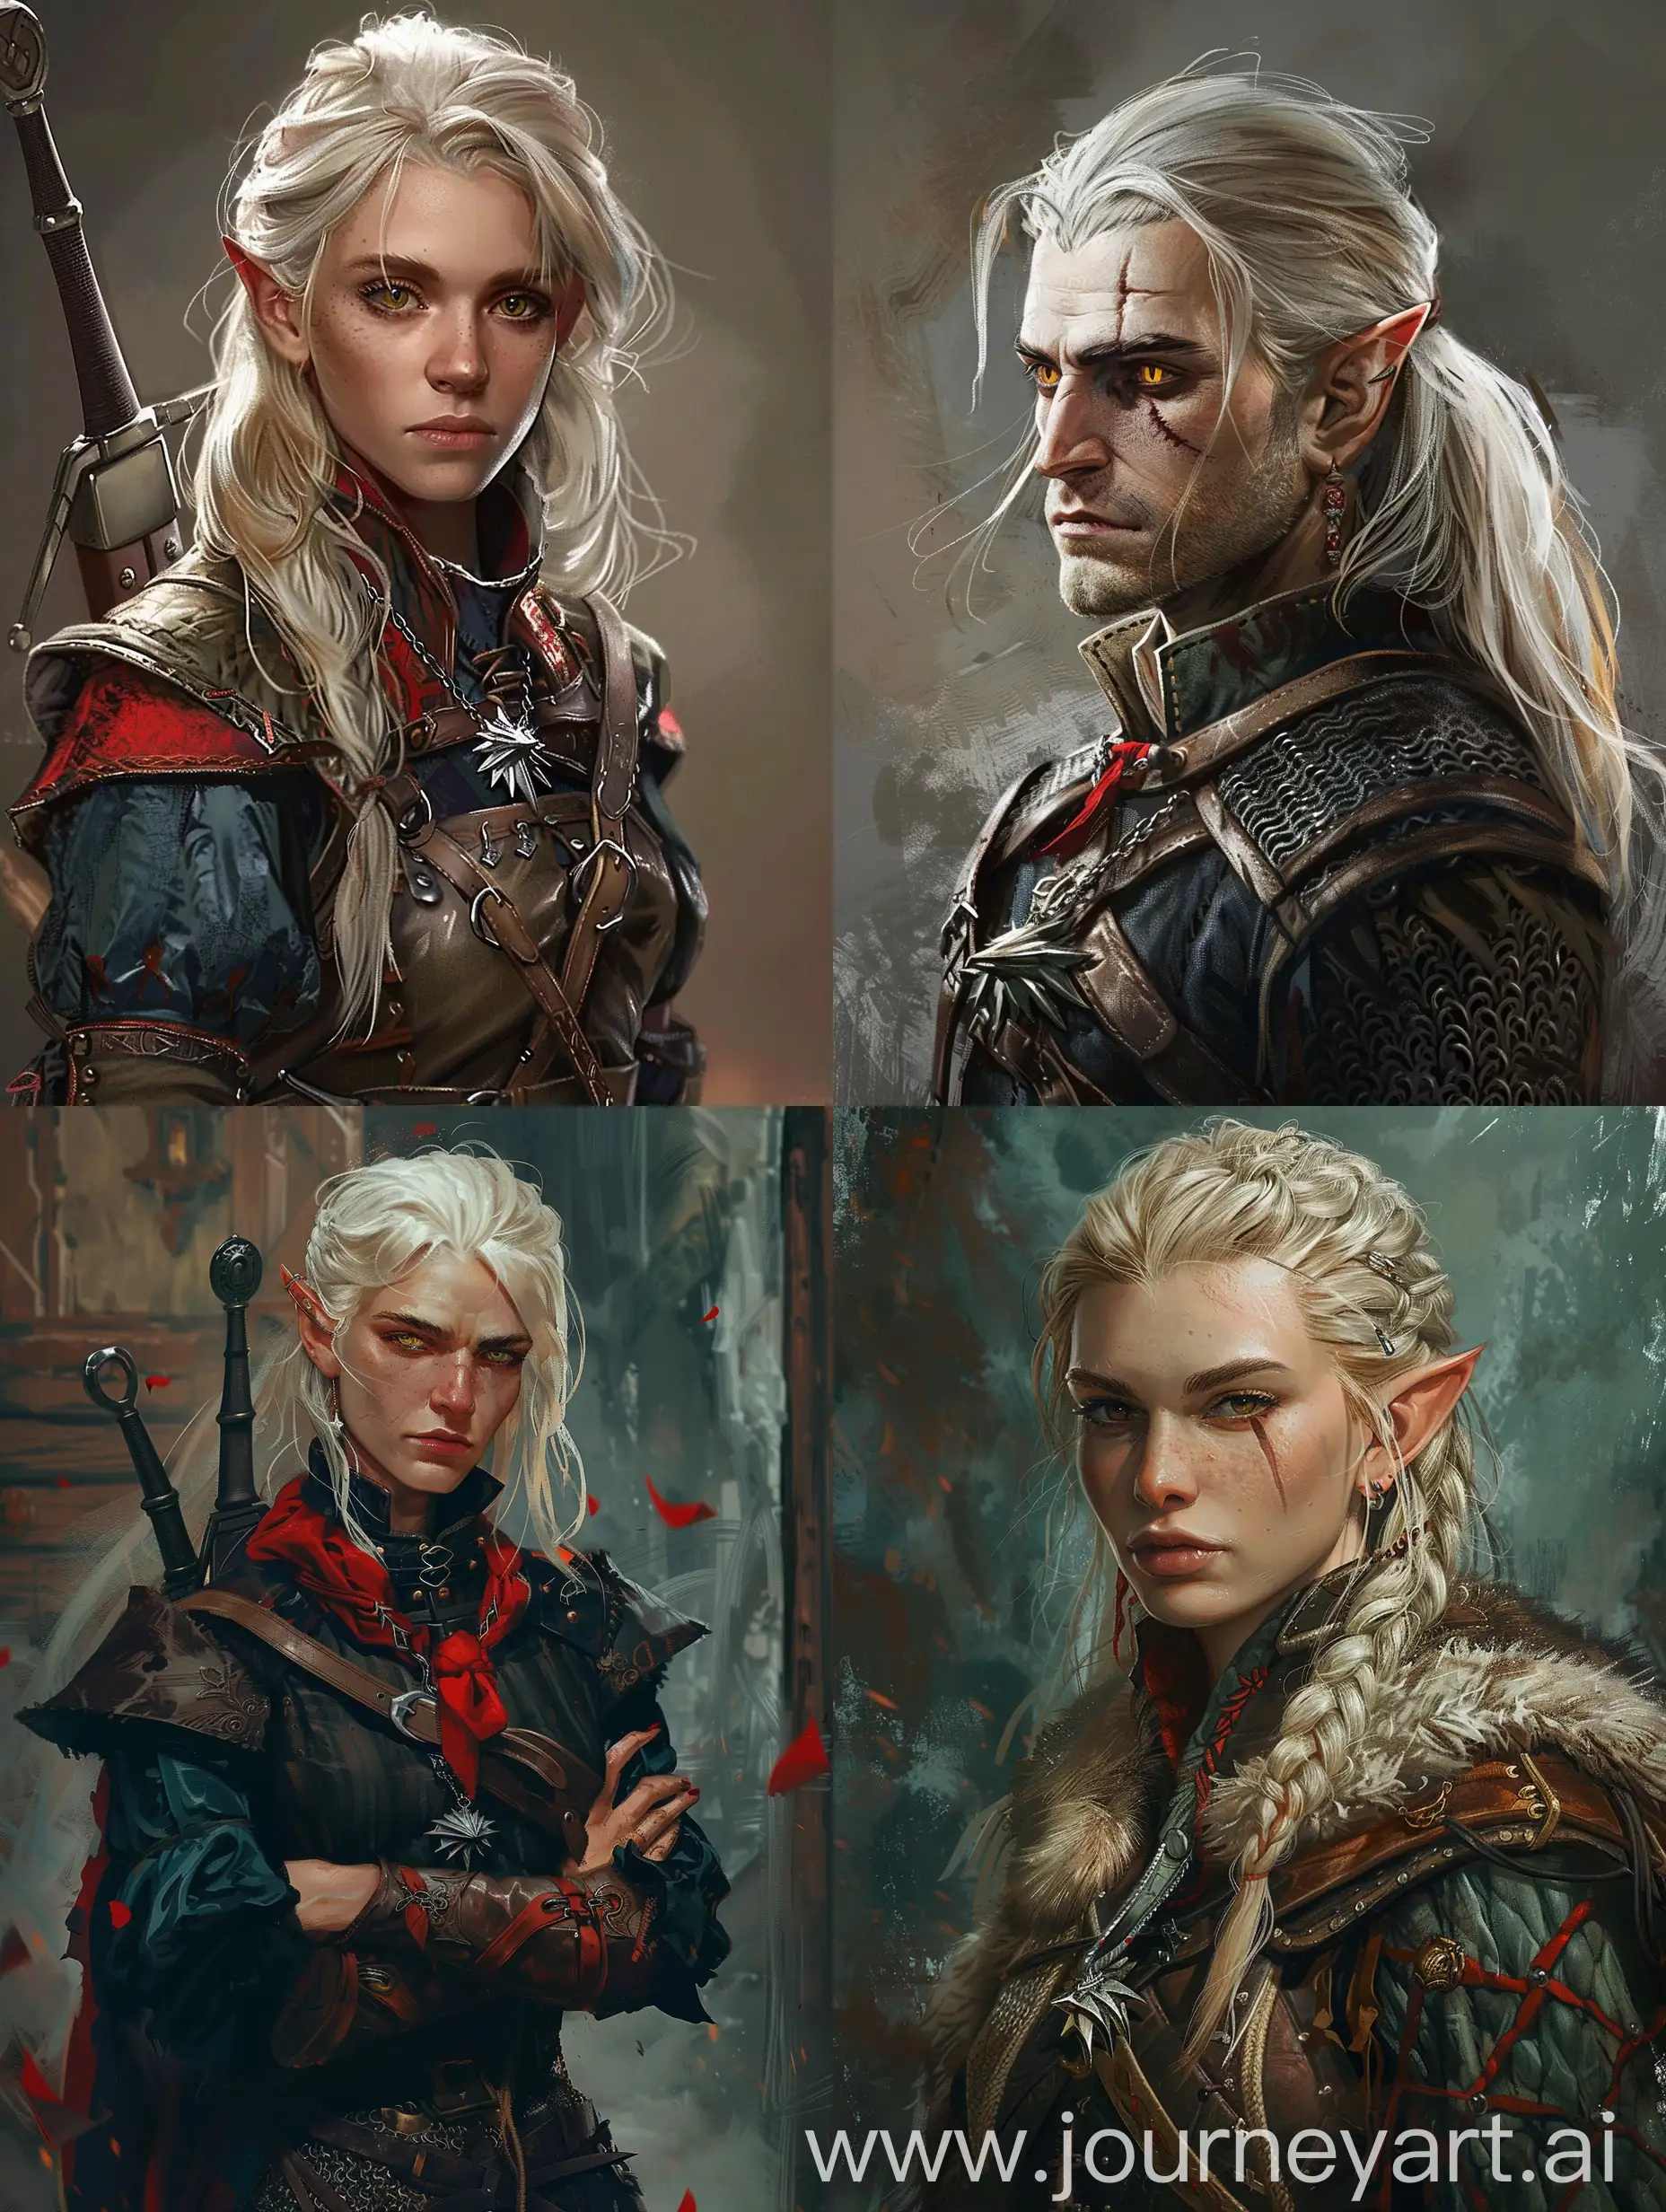 Elf Eredin Breakk Glas from the game "The Witcher 3" in the style of igia 